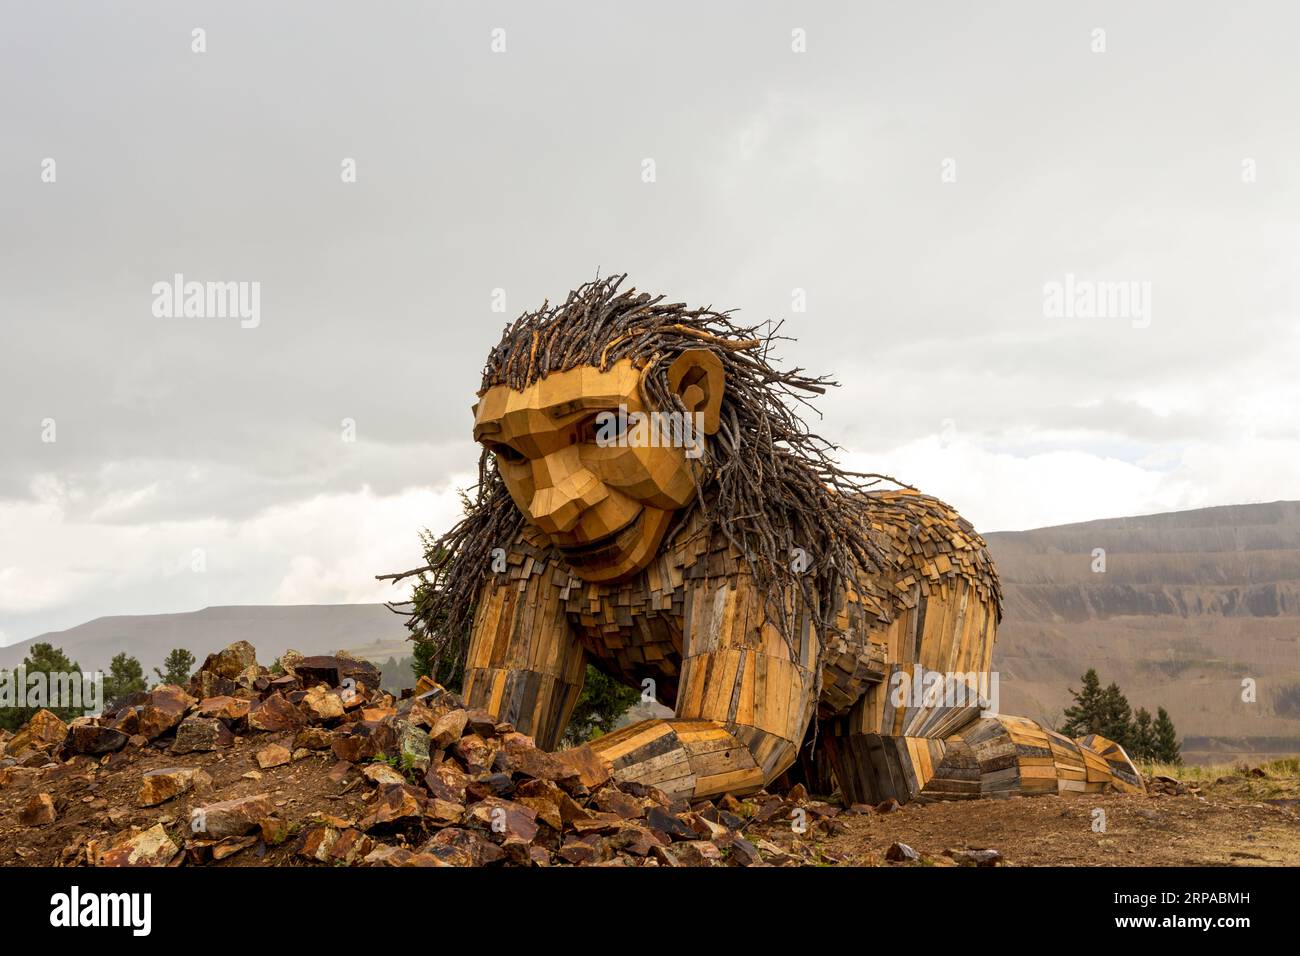 Victor, Colorado - August 27, 2023: Thomas Dambo's 'Rita, the Rock Planter' sculpture unveiled on the Little Grouse Mountain Overlook near Victor, Col Stock Photo